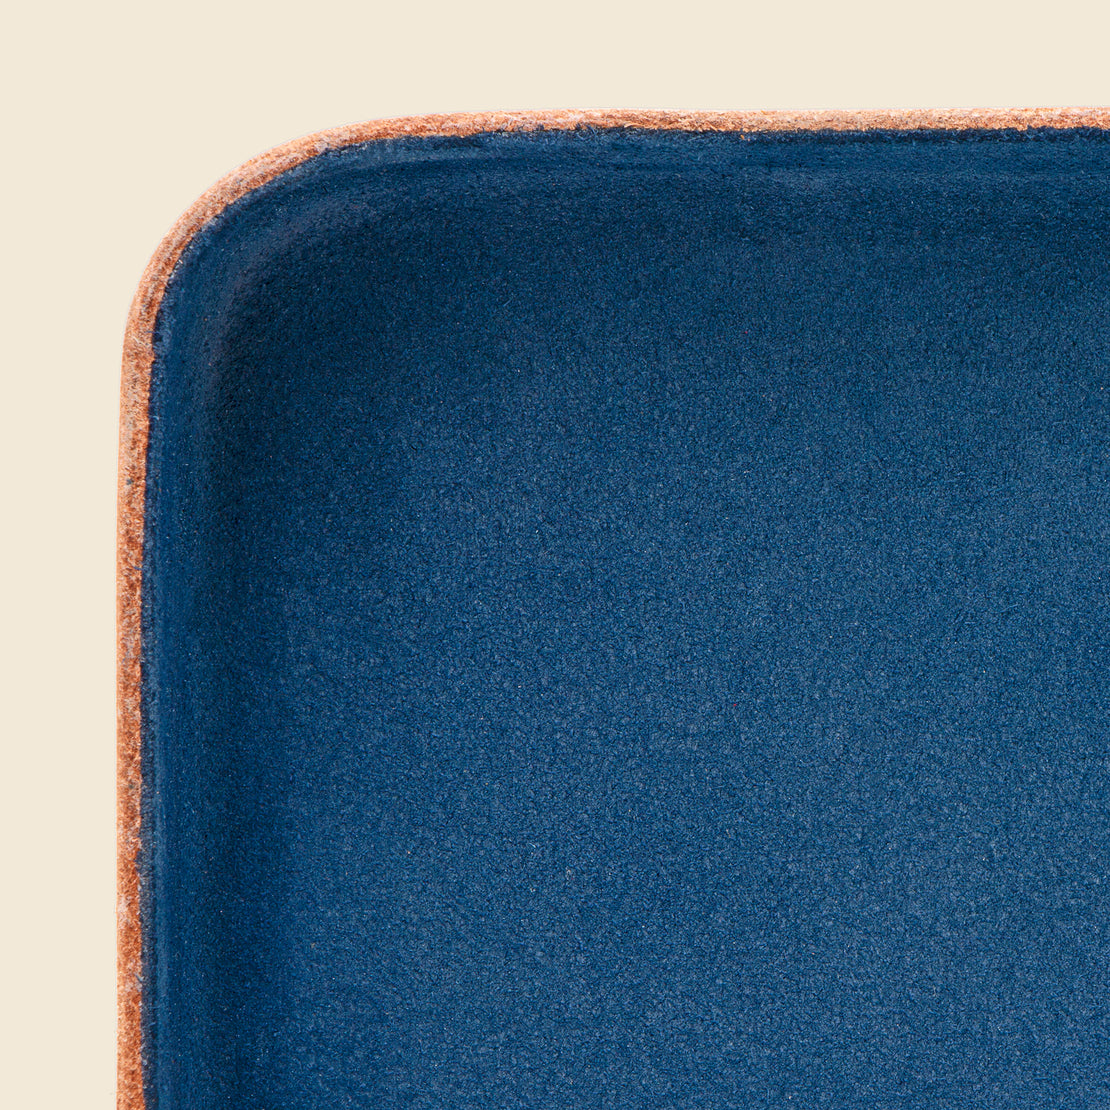 Medium Suede Tray - Navy - Home - STAG Provisions - Home - Art & Accessories - Tray